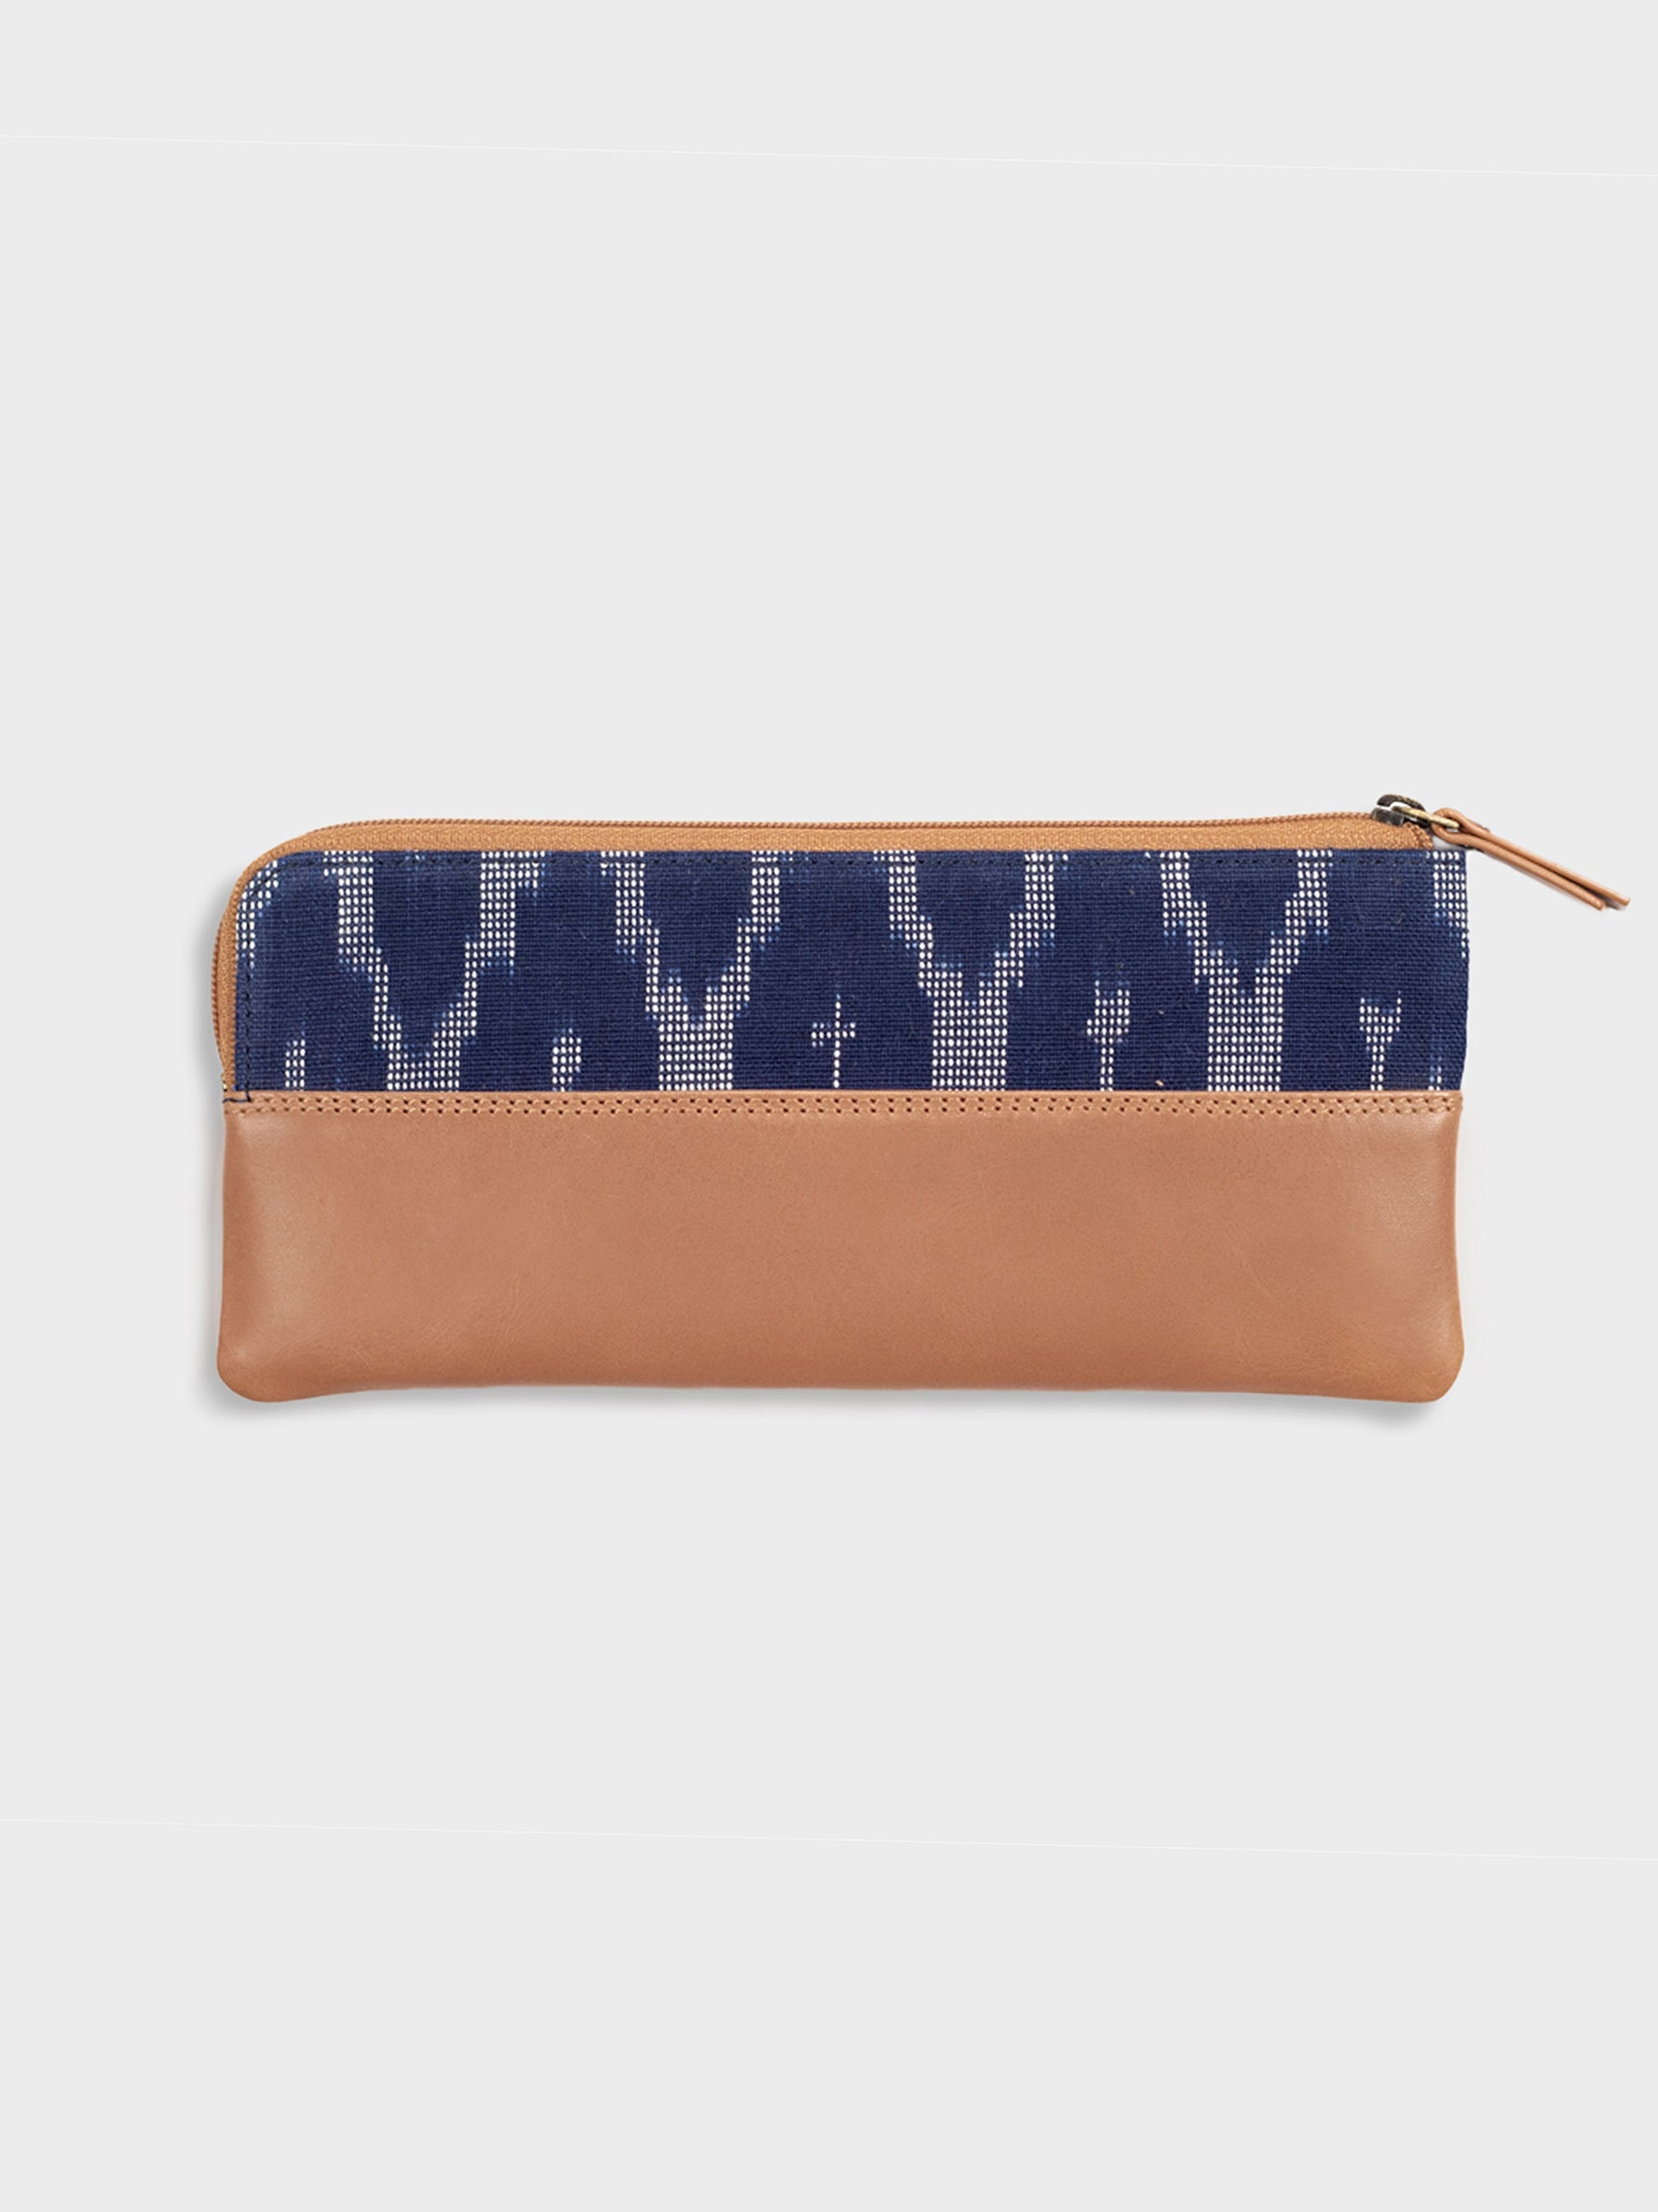 Handcrafted Premium Genuine Vegetable Tanned Leather & Ikat Navy Blue Pencil Pouch for Women Tan & Loom